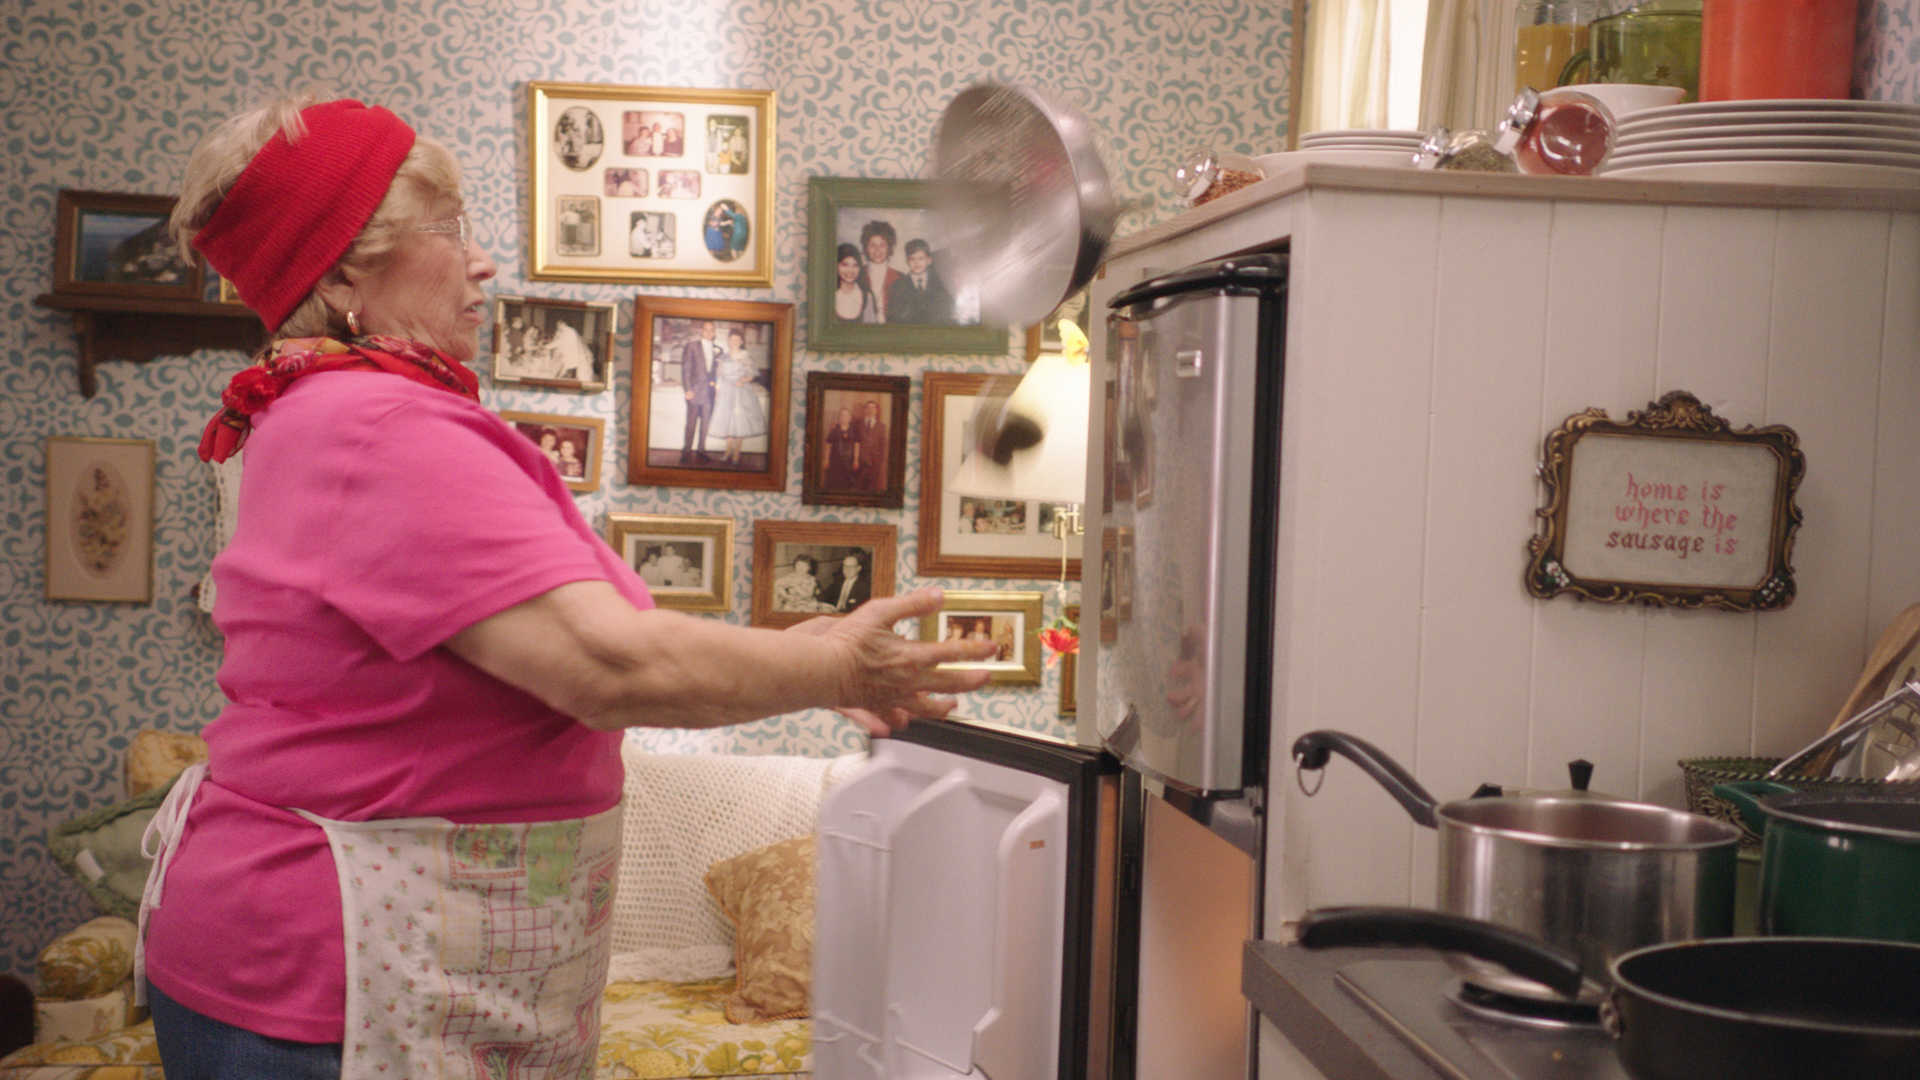 Matt Badger edits Sausage Nonnas campaign with Mike Long, Second Child, and Droga5.